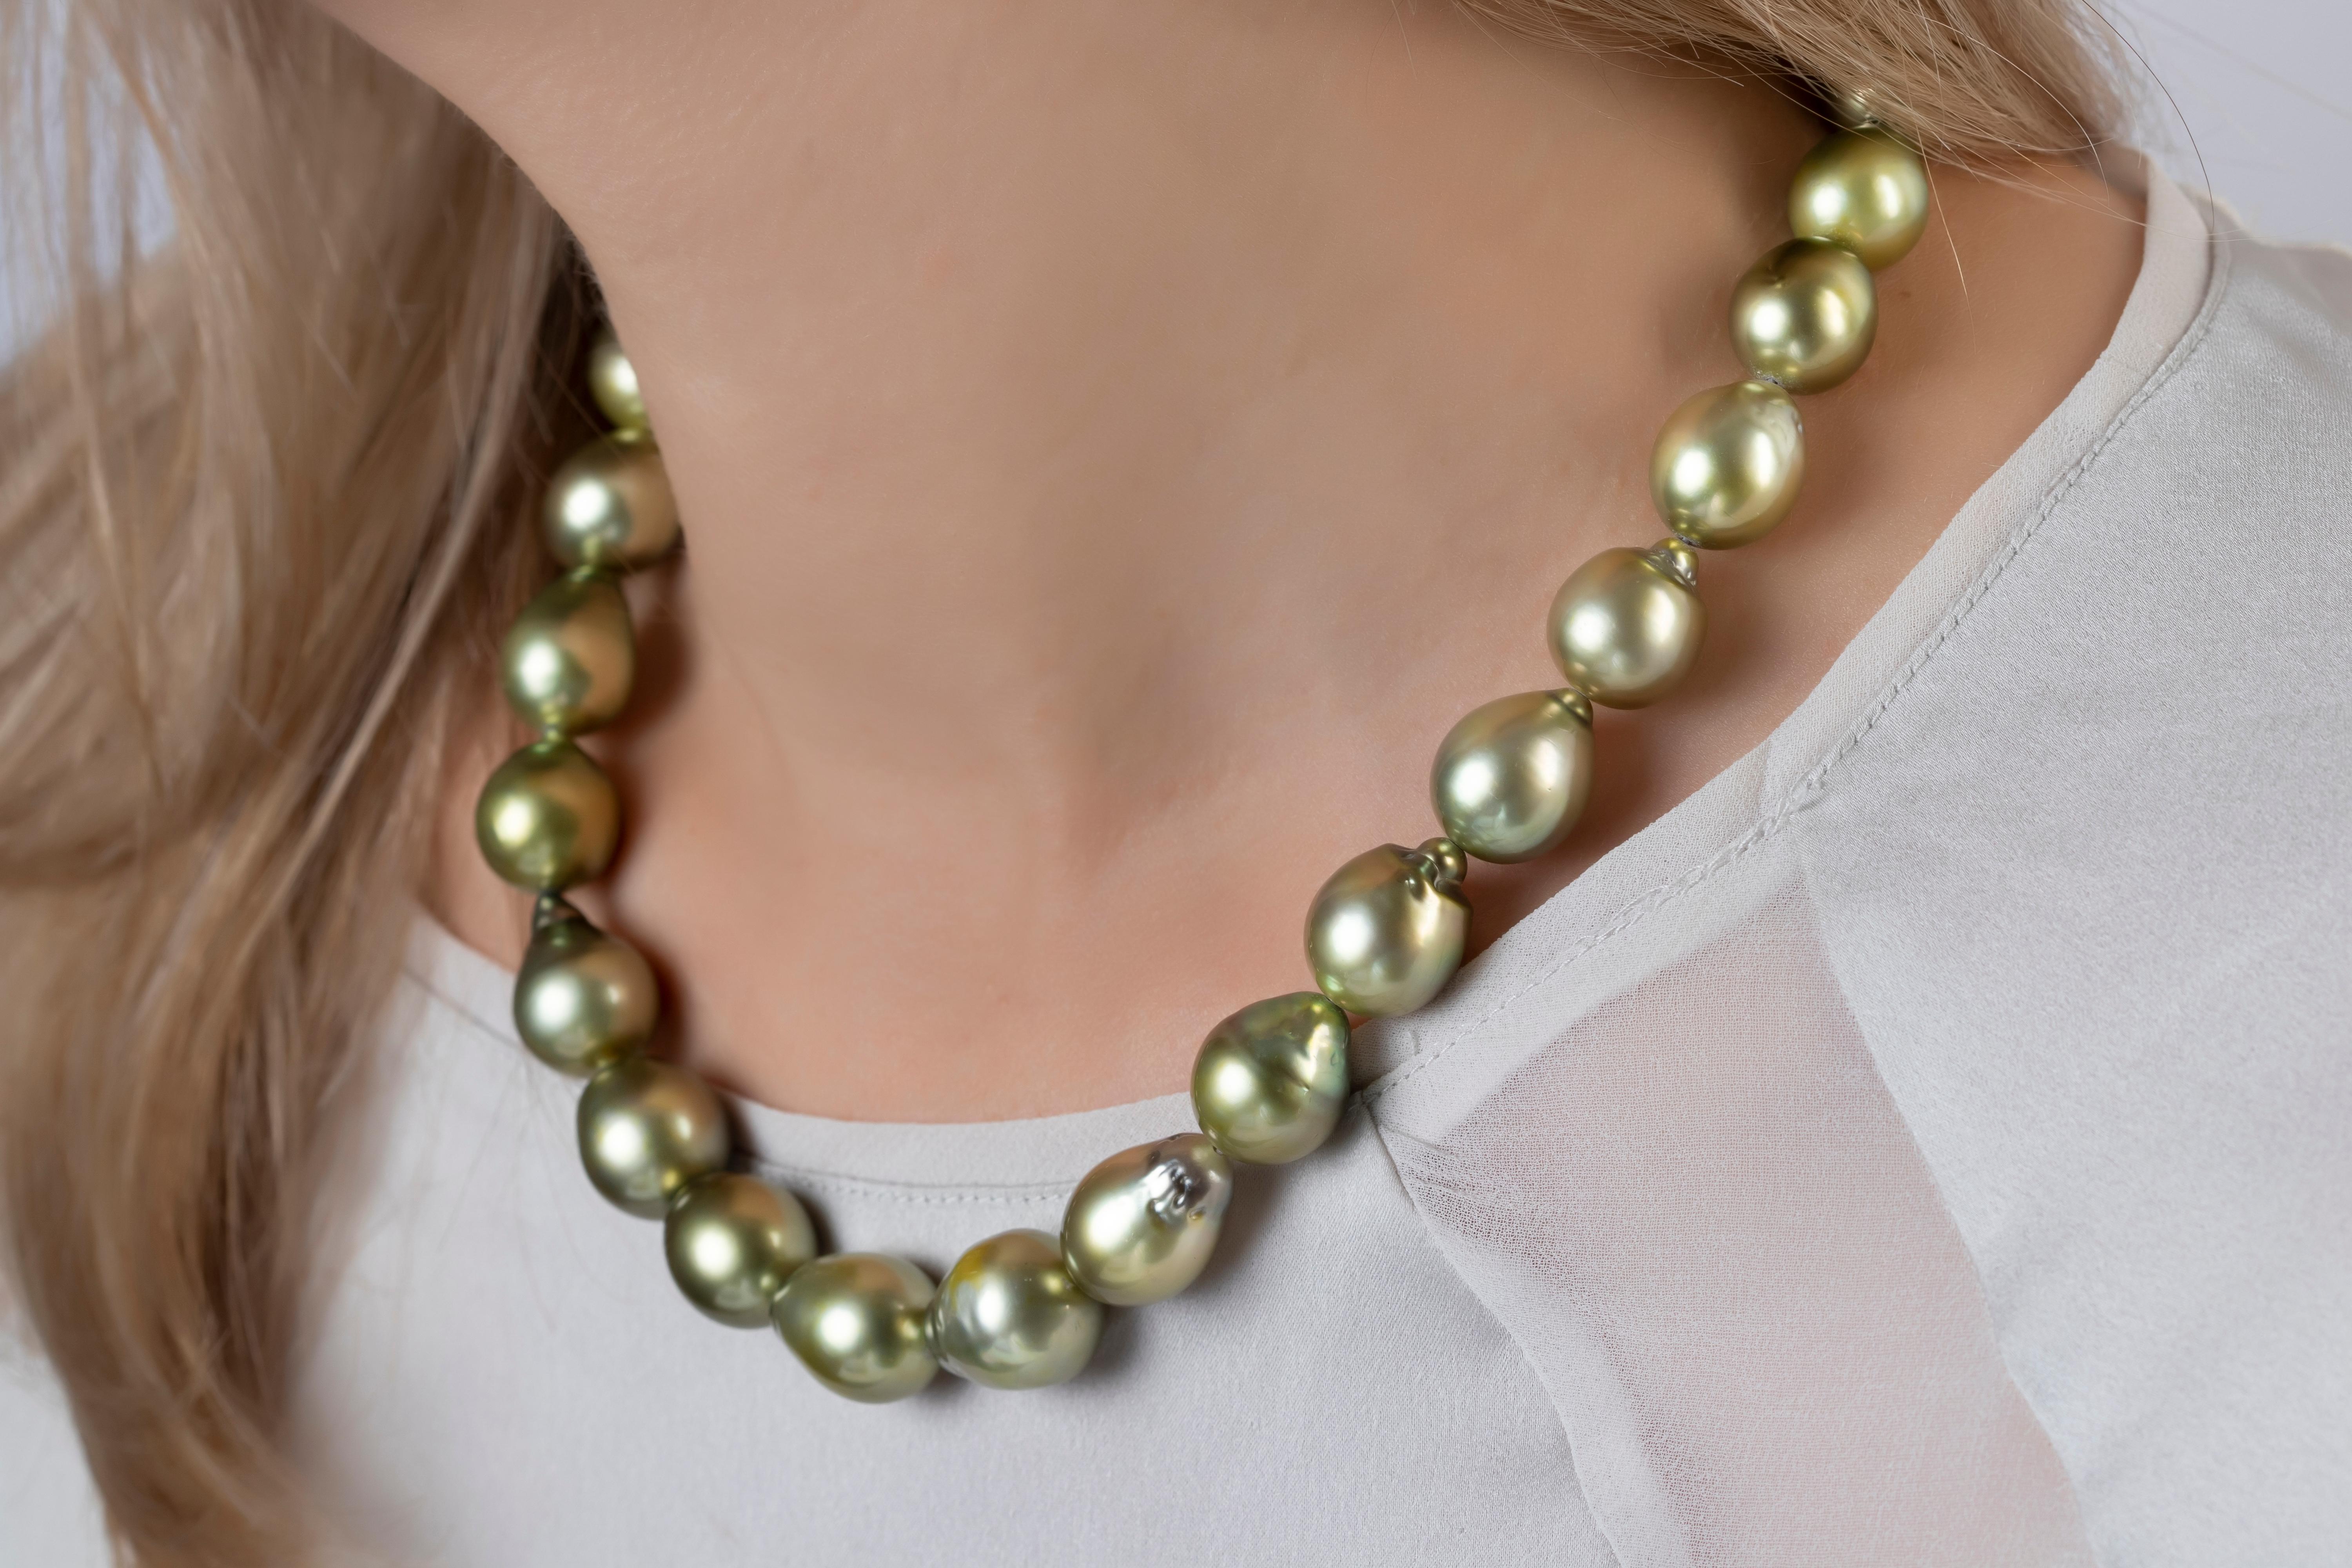 This unique necklace by Yoko London featured baroque shaped pistachio-coloured Tahitian pearls, completed with a simple white gold strand. Each baroque pearl is completely unique and this design perfectly highlights their individual allure and